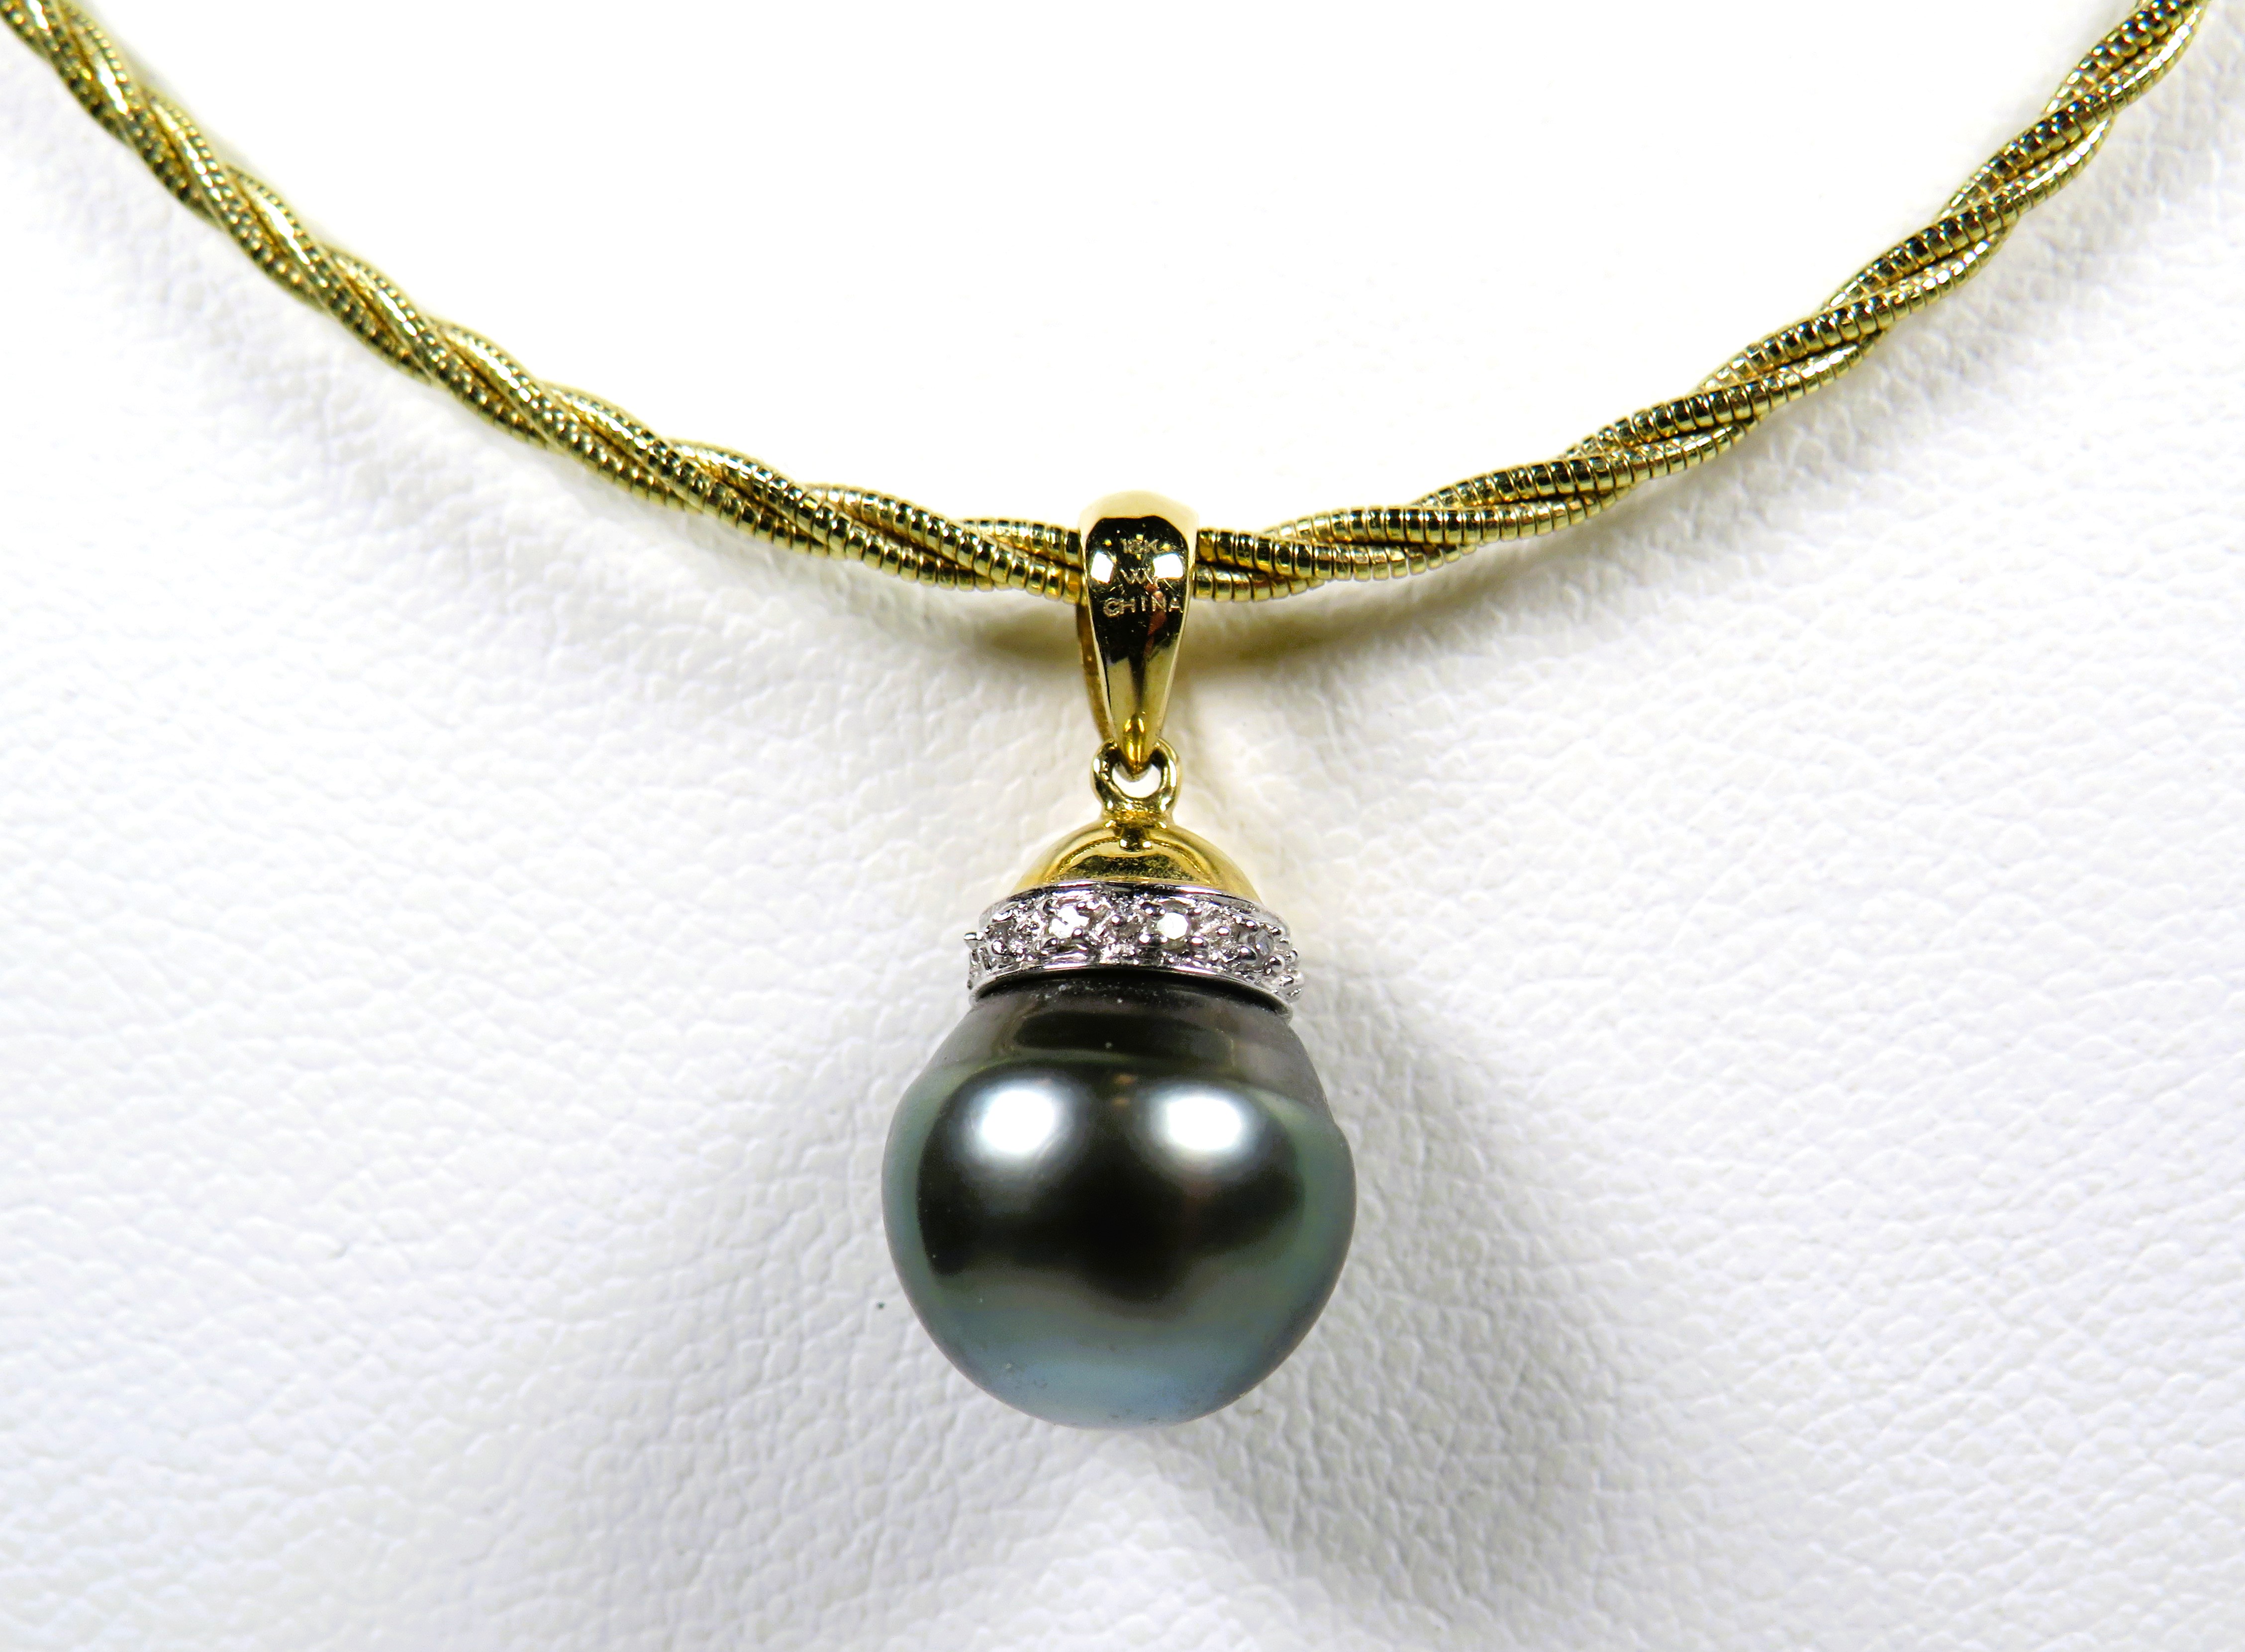 9ct Yellow Gold Pendant set with a Dusky 10mm Pearl and Diamond surround hung on an 18inch 9ct Twist - Image 2 of 2